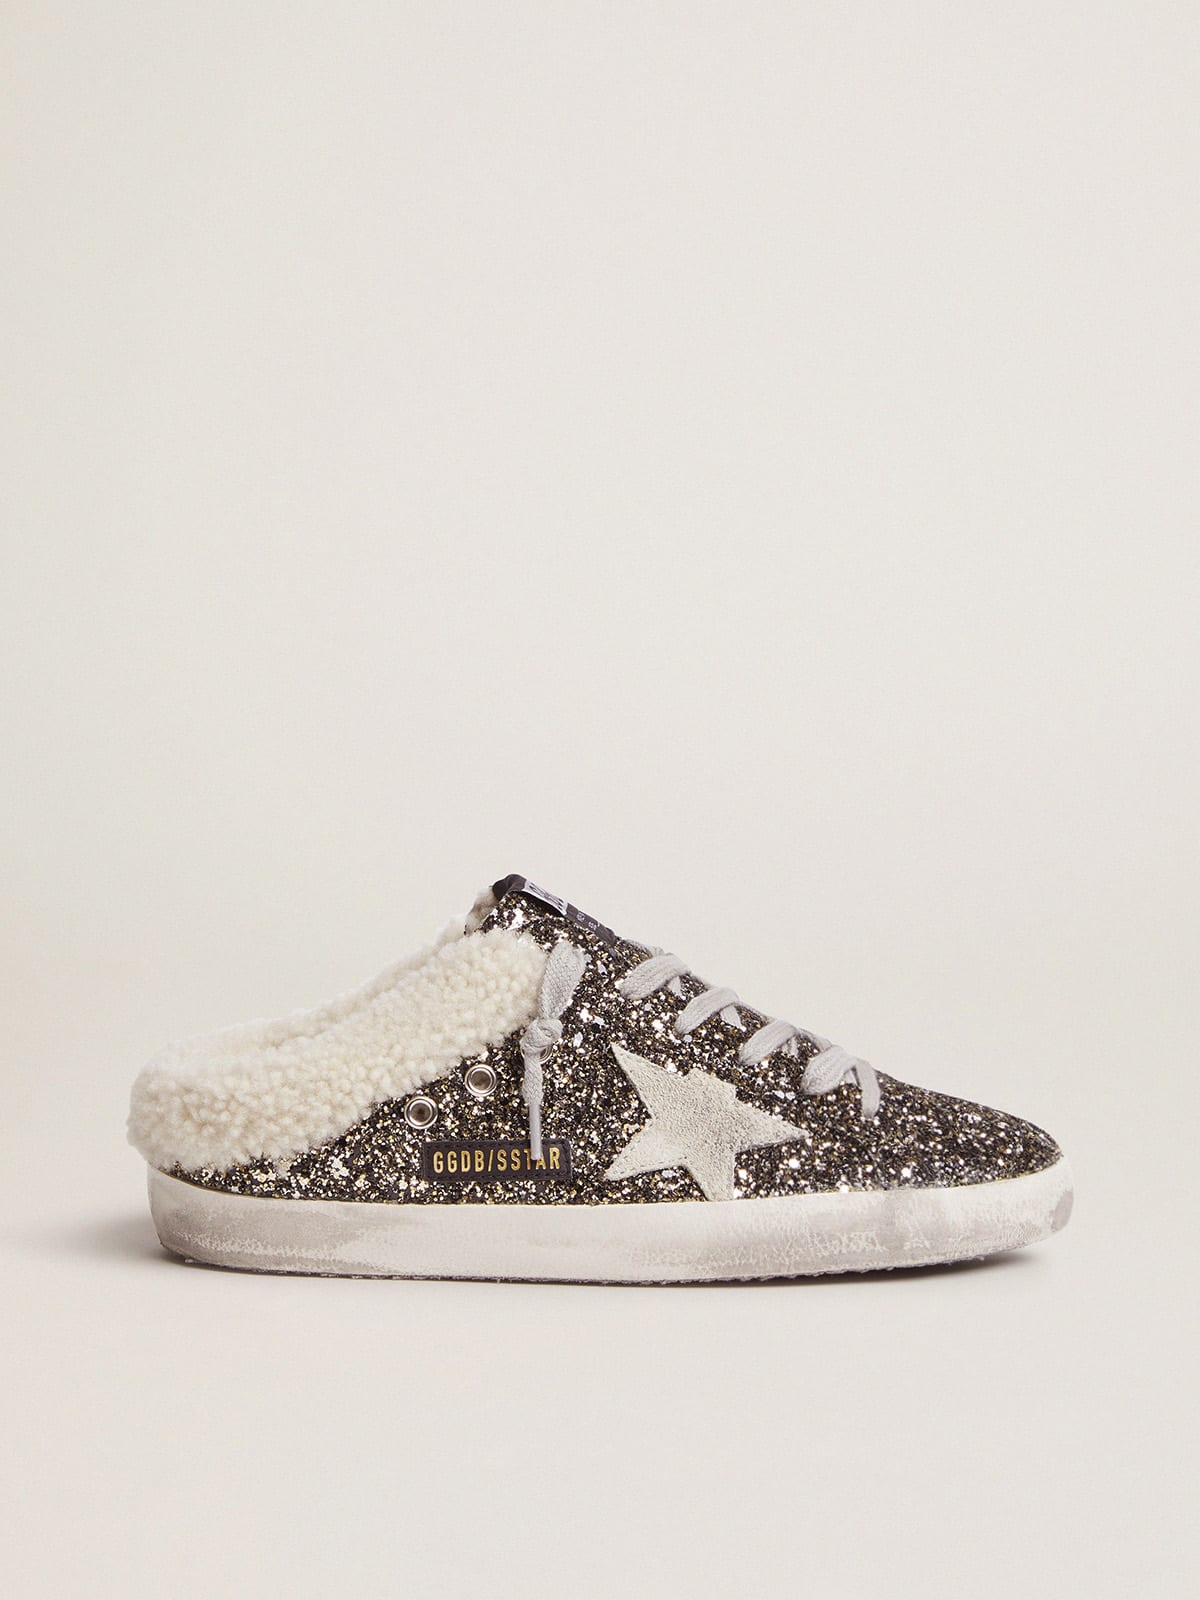 Golden Goose - Super-Star sabot-style sneakers with glitter and shearling lining in 